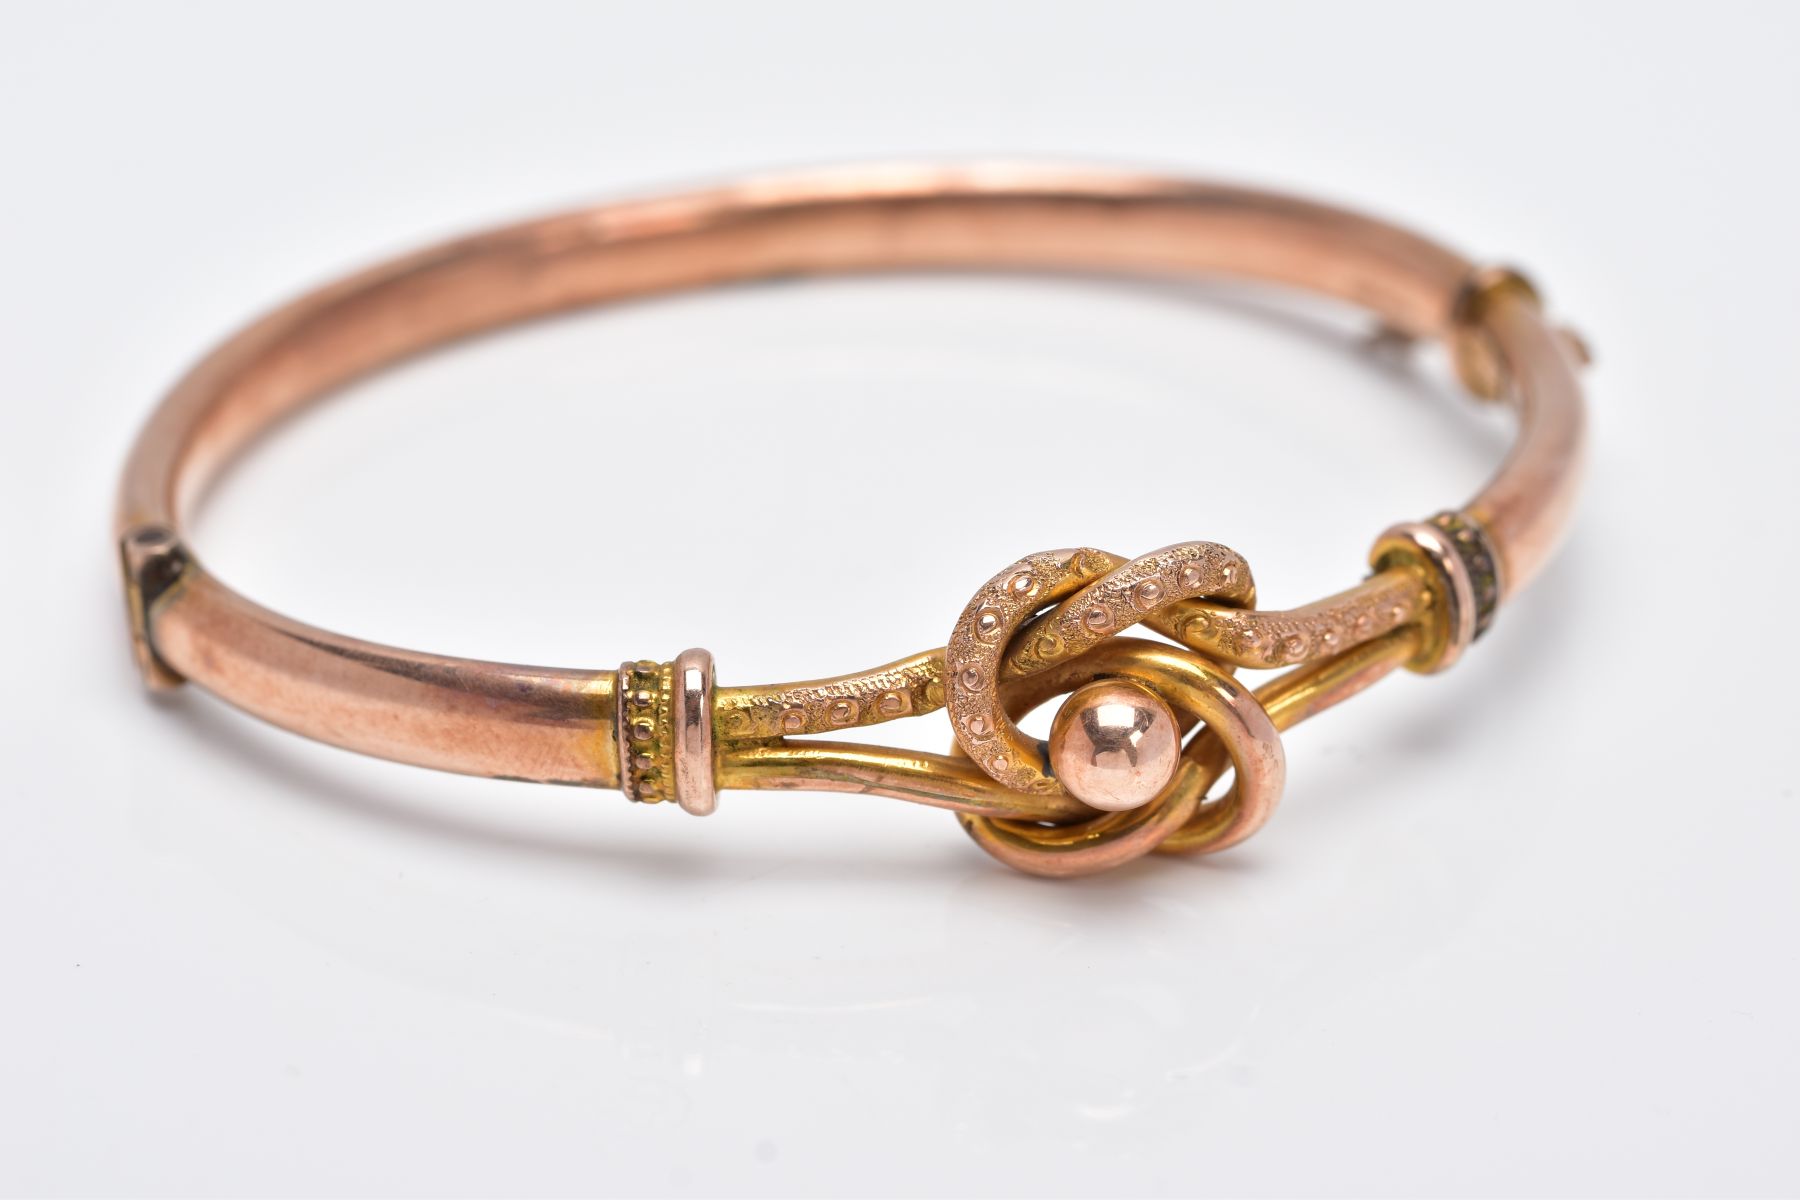 A YELLOW METAL BANGLE, the hinged bangle of a knot and ball openwork design, fitted with a push